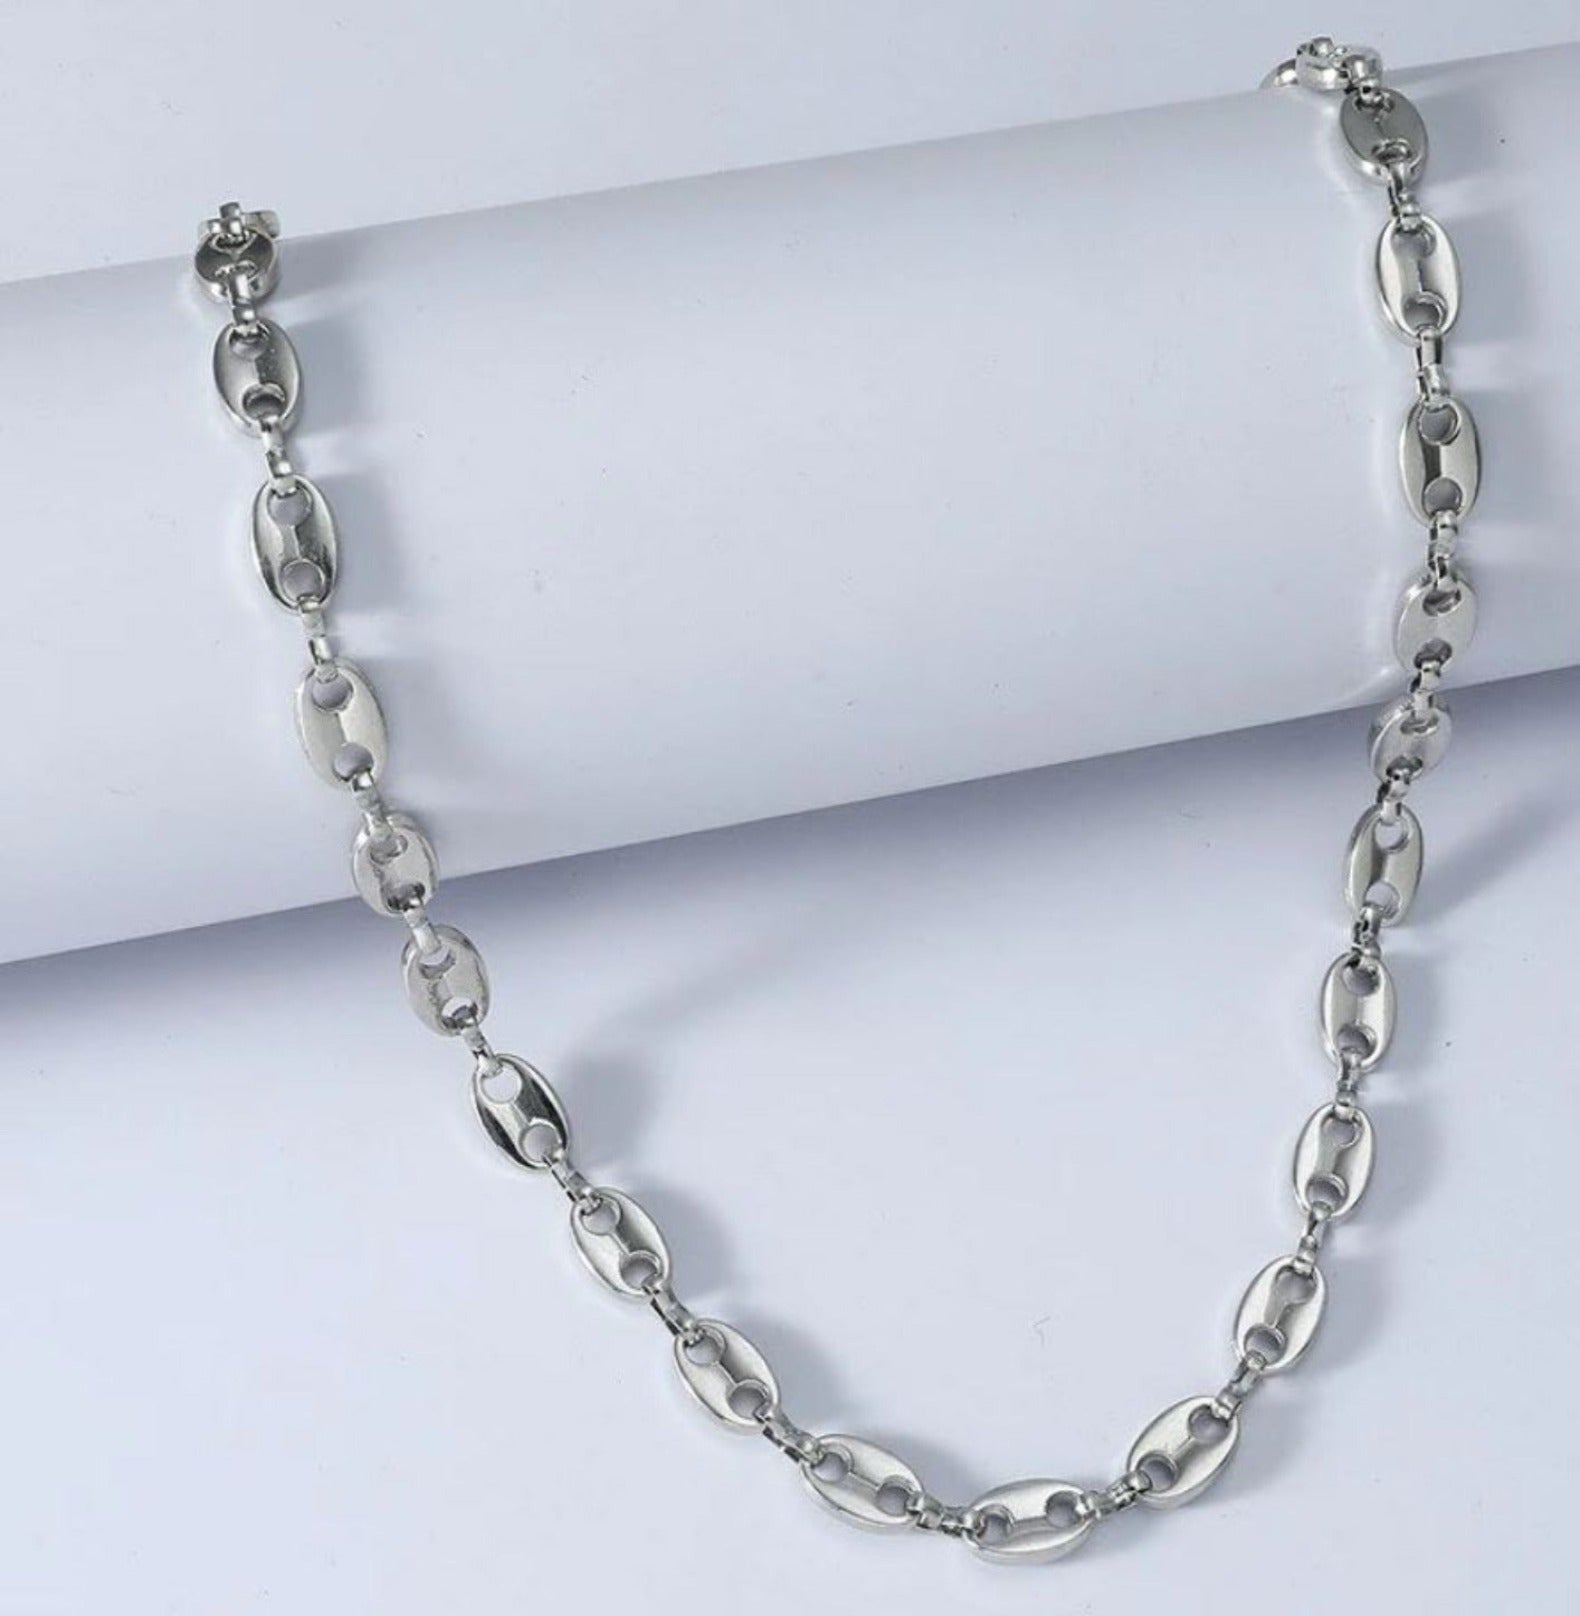 KANE NECKLACE neck Yubama Jewelry Online Store - The Elegant Designs of Gold and Silver ! 